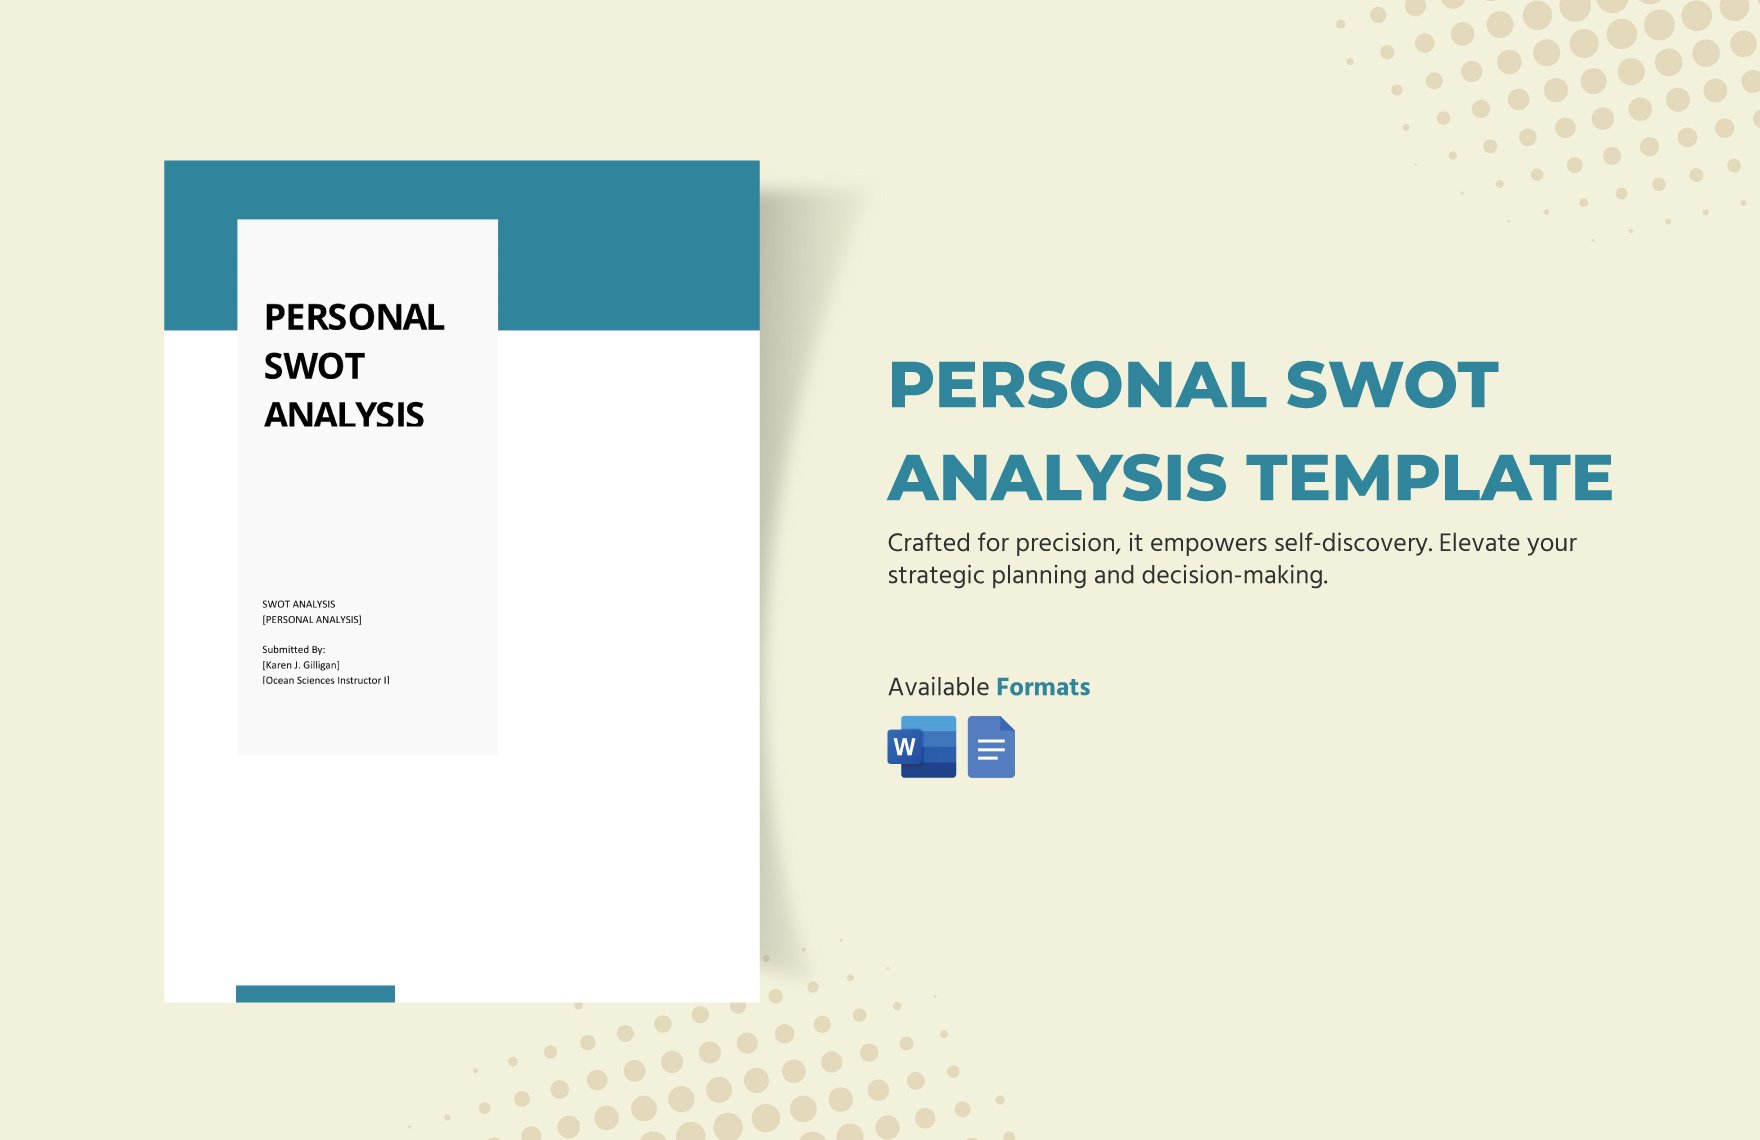 Personal Swot Analysis Template in Word, Google Docs